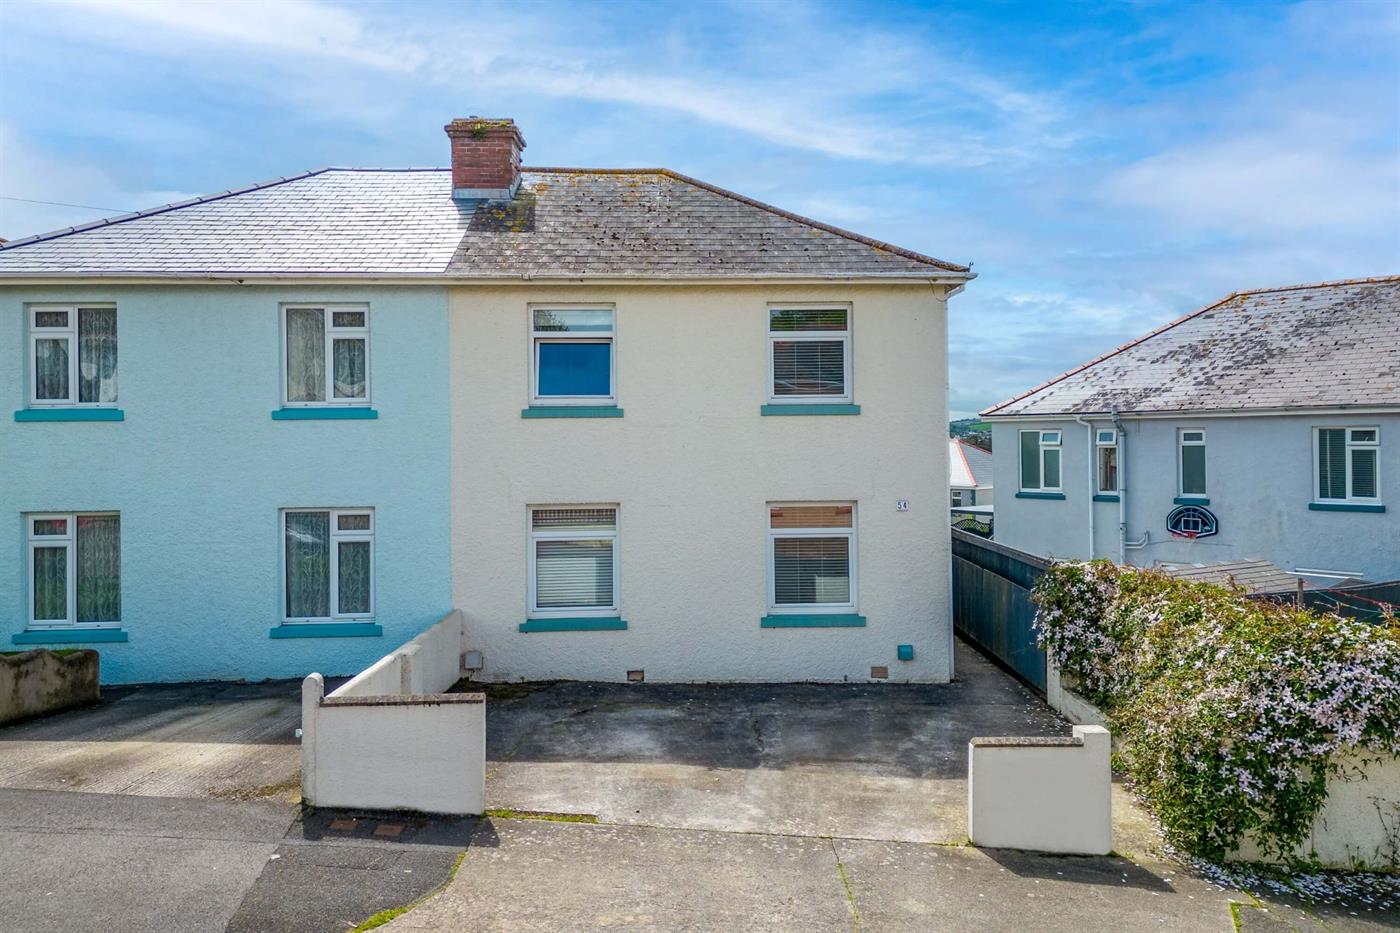 3 Bedroom Semi-Detached House for Sale (Sold): Westhill Avenue, Torquay, TQ1 4LQ